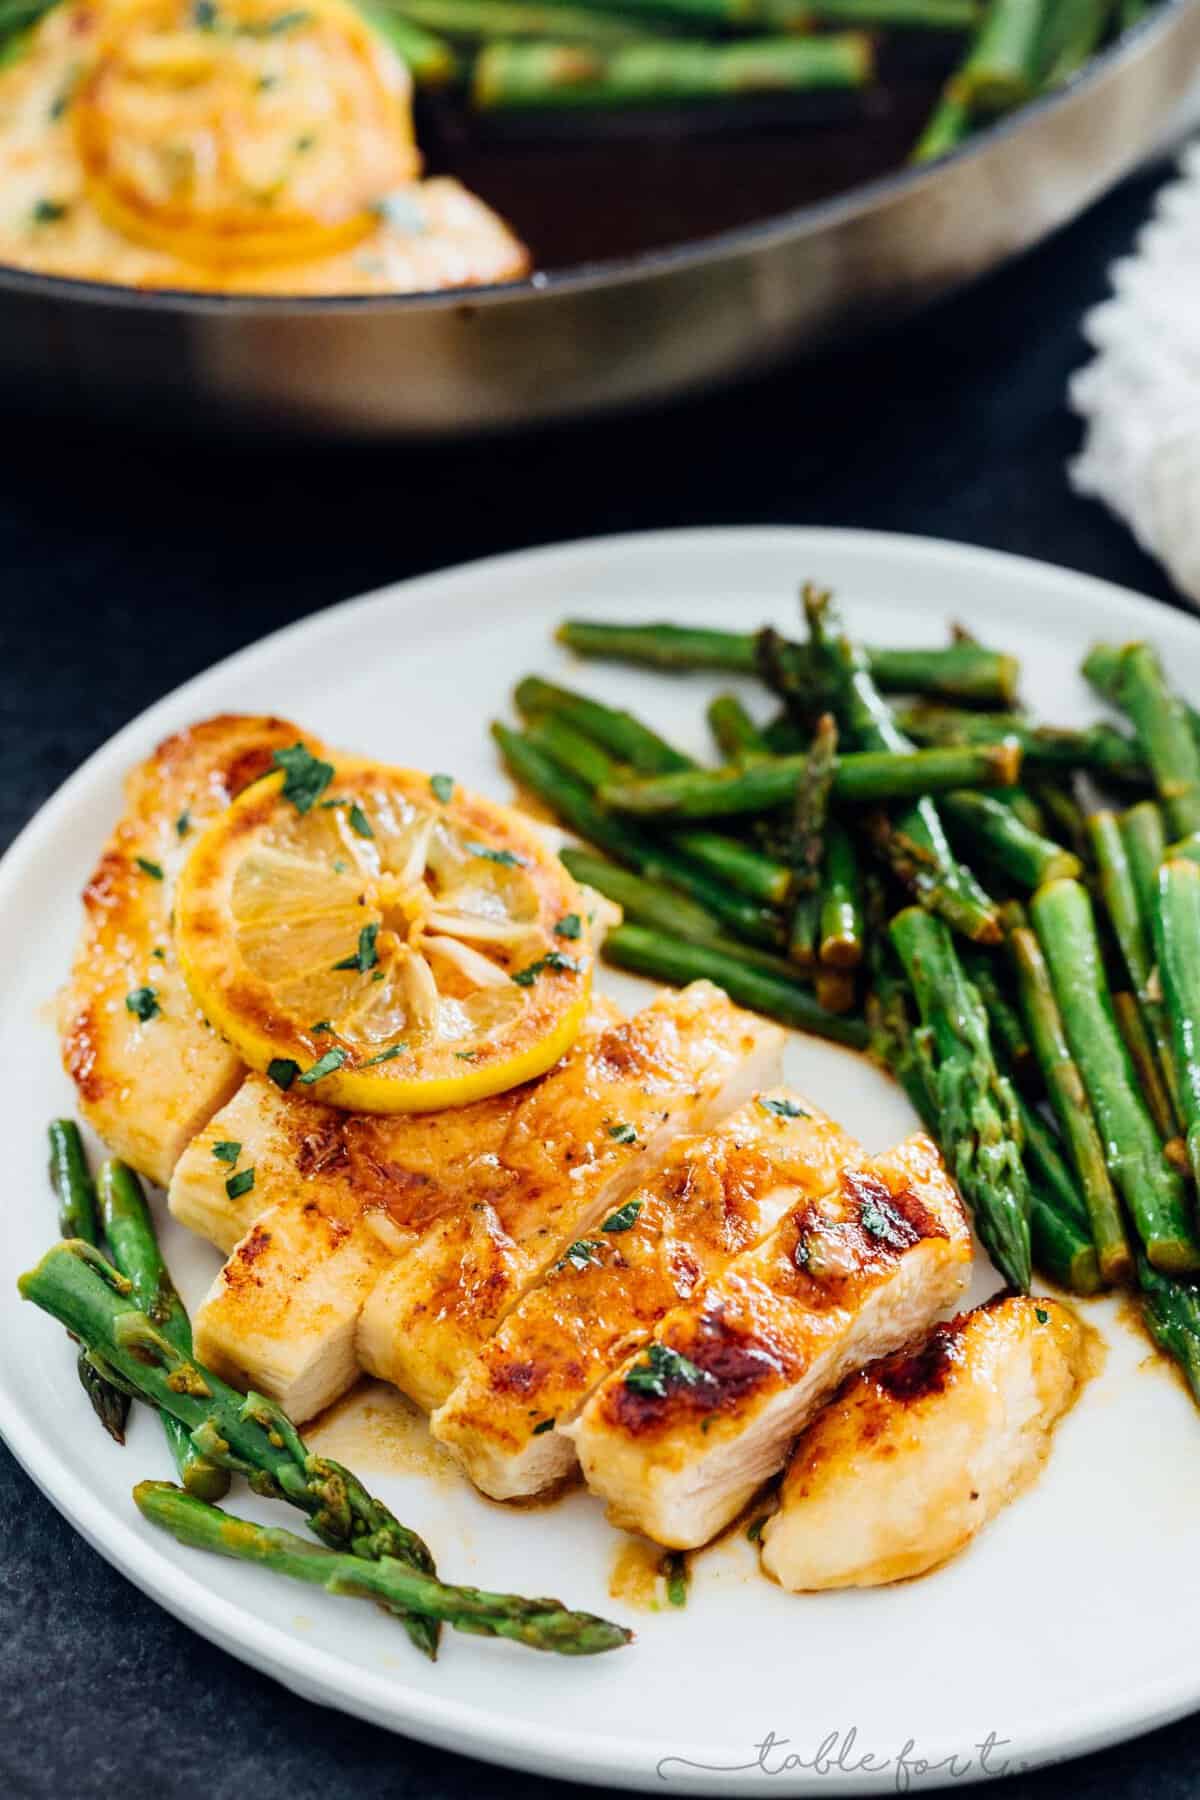 This honey butter lemon chicken with asparagus has some of the freshest ingredients to make a flavorful weeknight dish! This recipe is quick and easy and uses one-skillet! Less mess and easy clean-up!